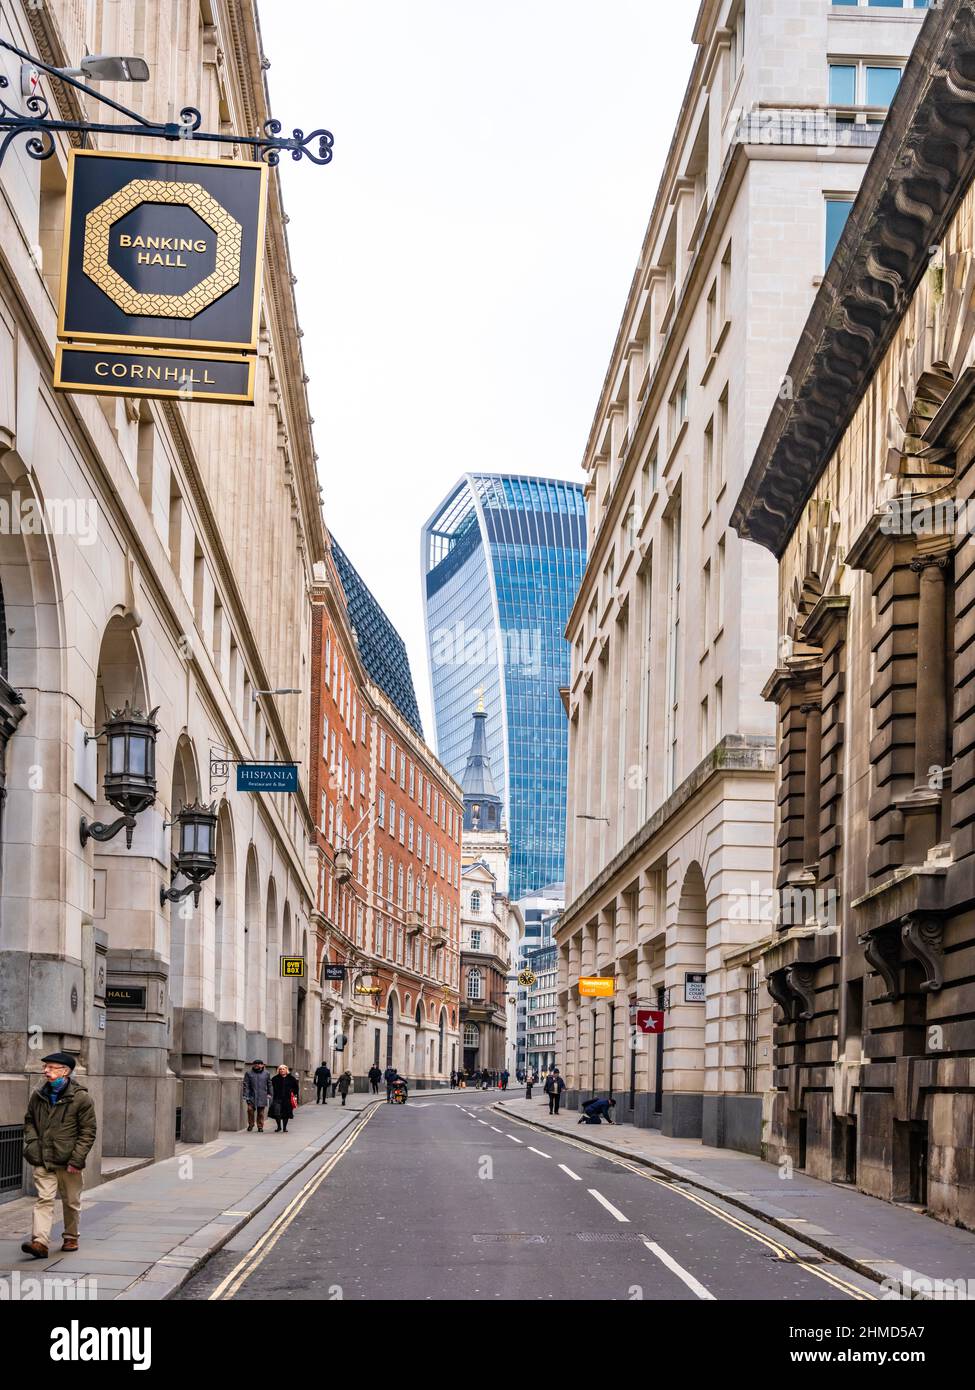 The Walkie-Talkie from Lombard Street, London. Banking Hall. Stock Photo